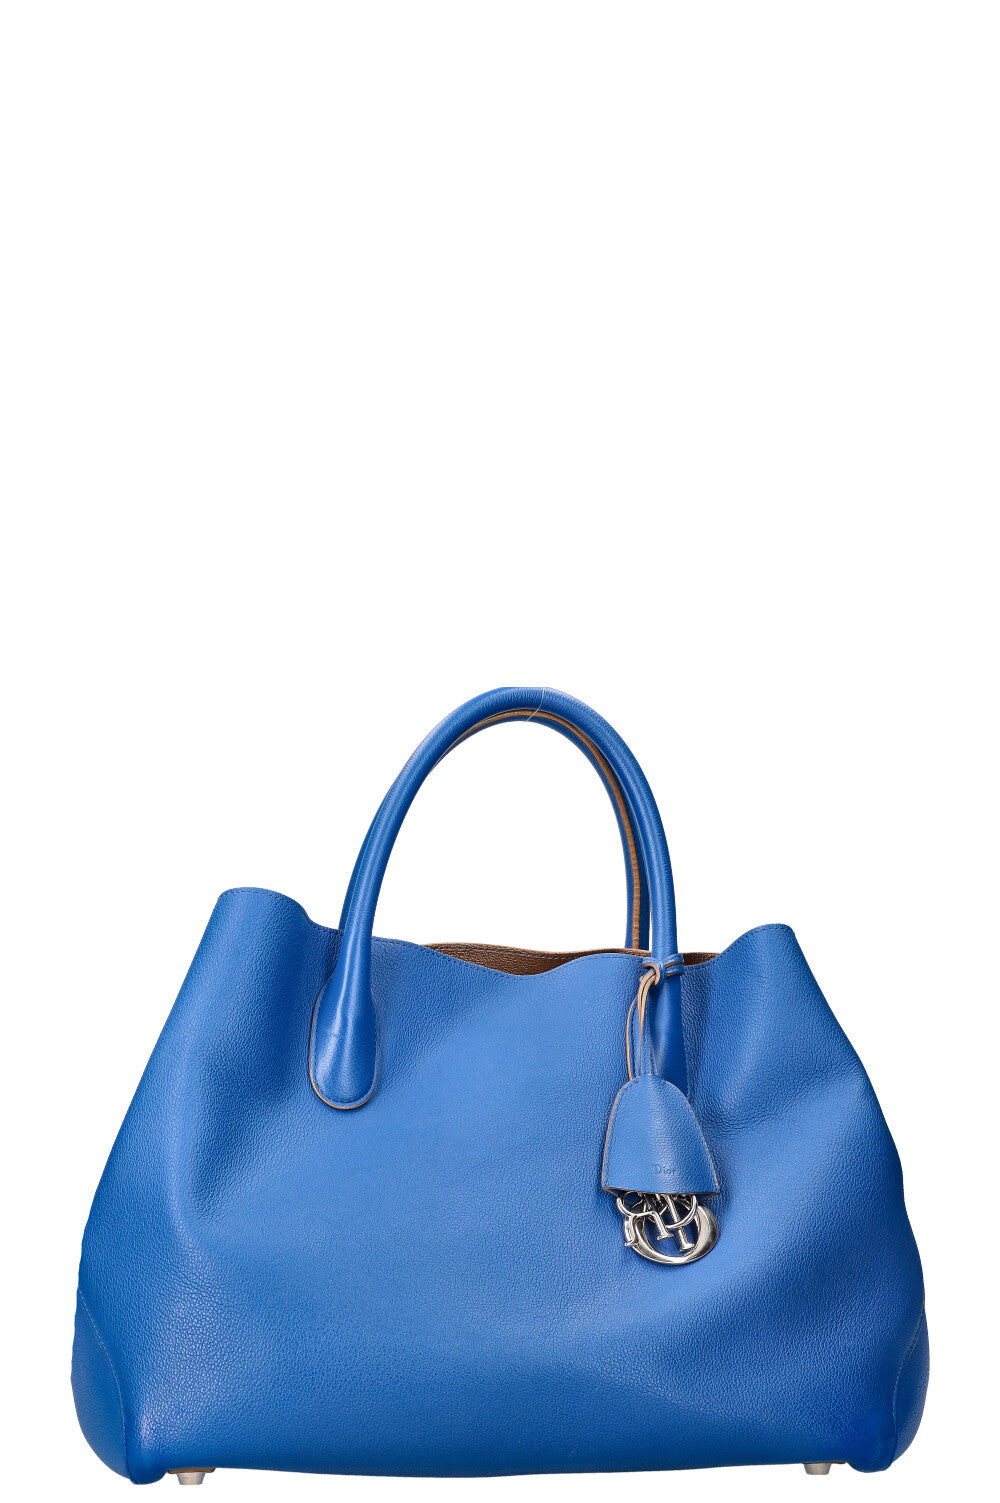 CHRISTIAN DIOR Open Bar Tote Large Blue